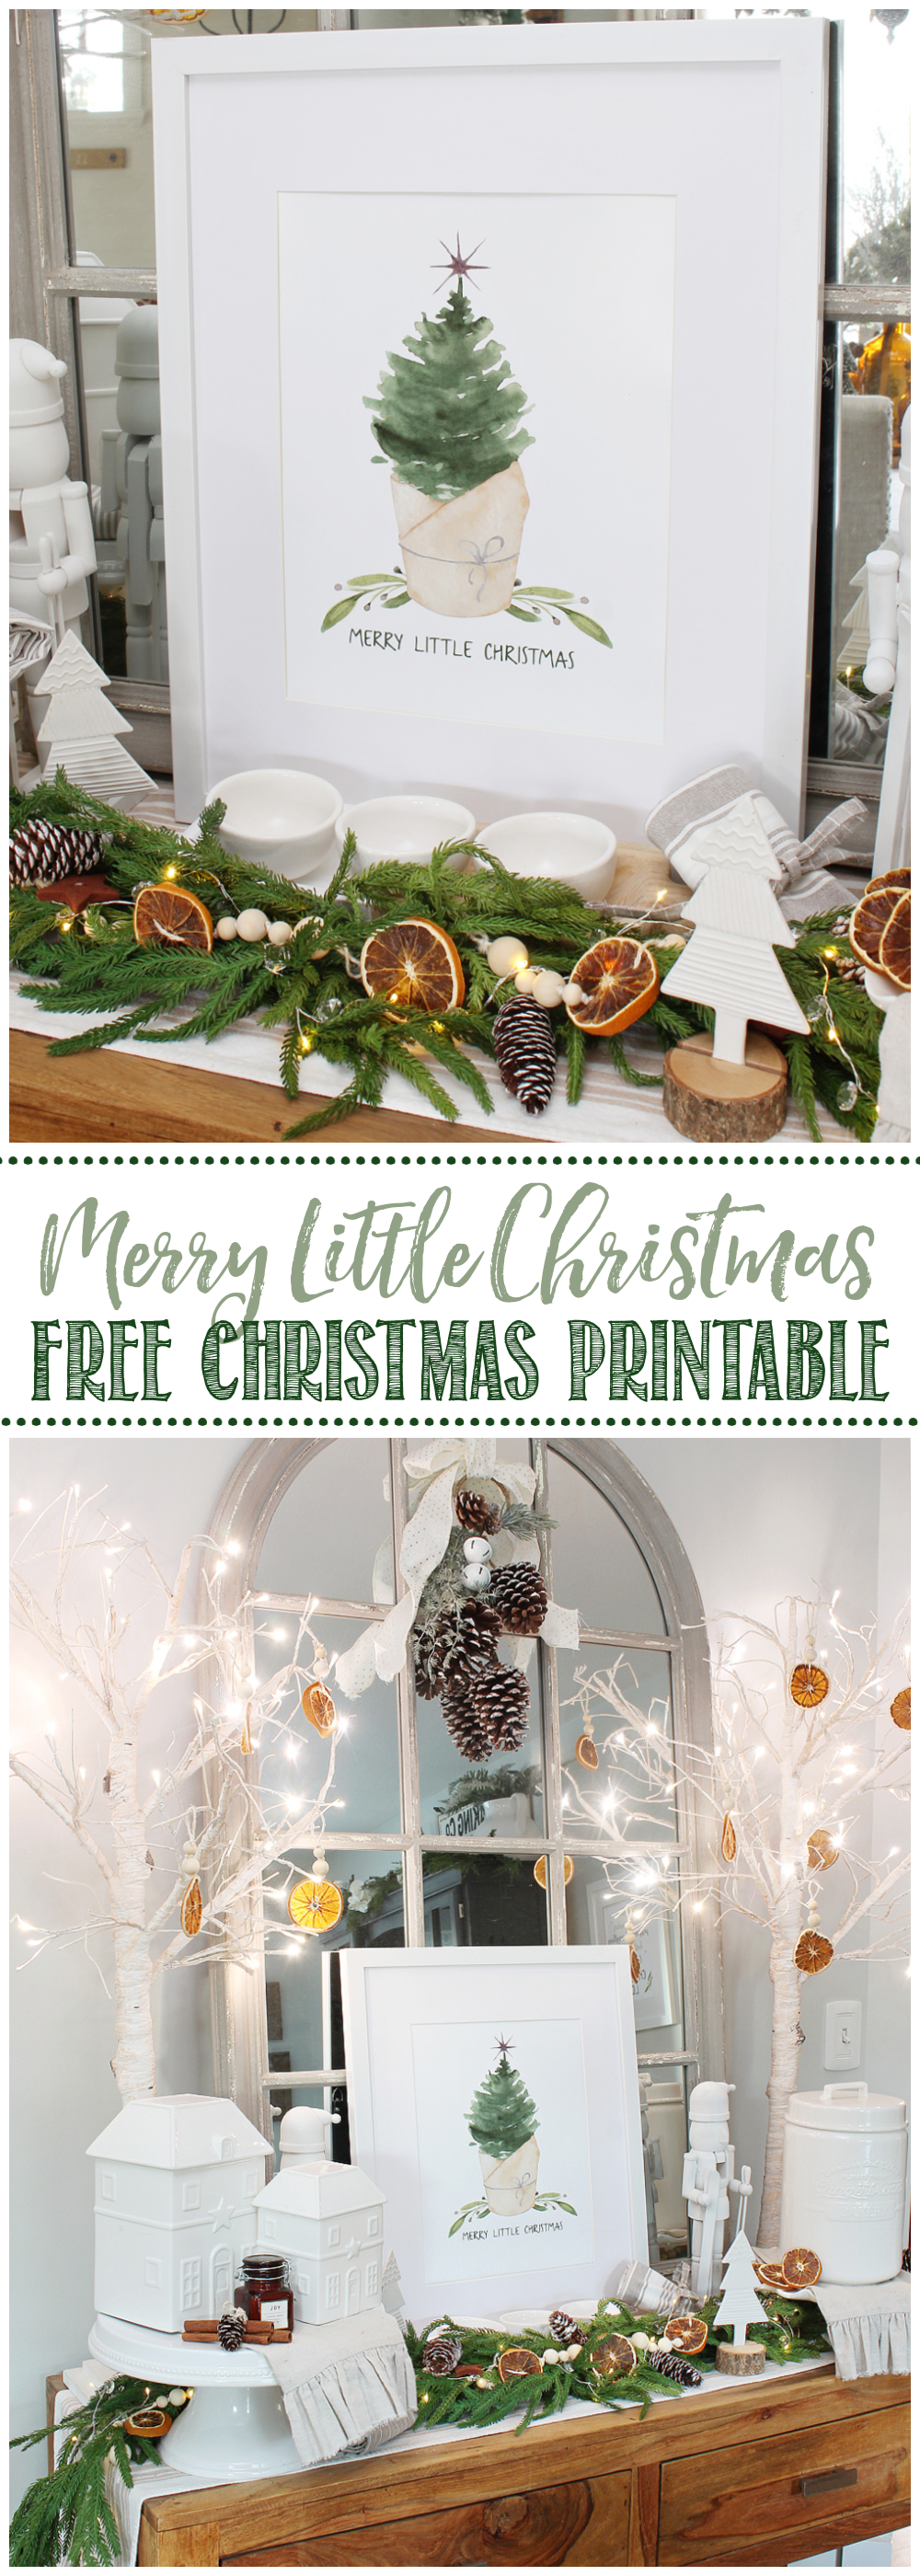 Merry Little Christmas free Christmas printable with watercolor tree.